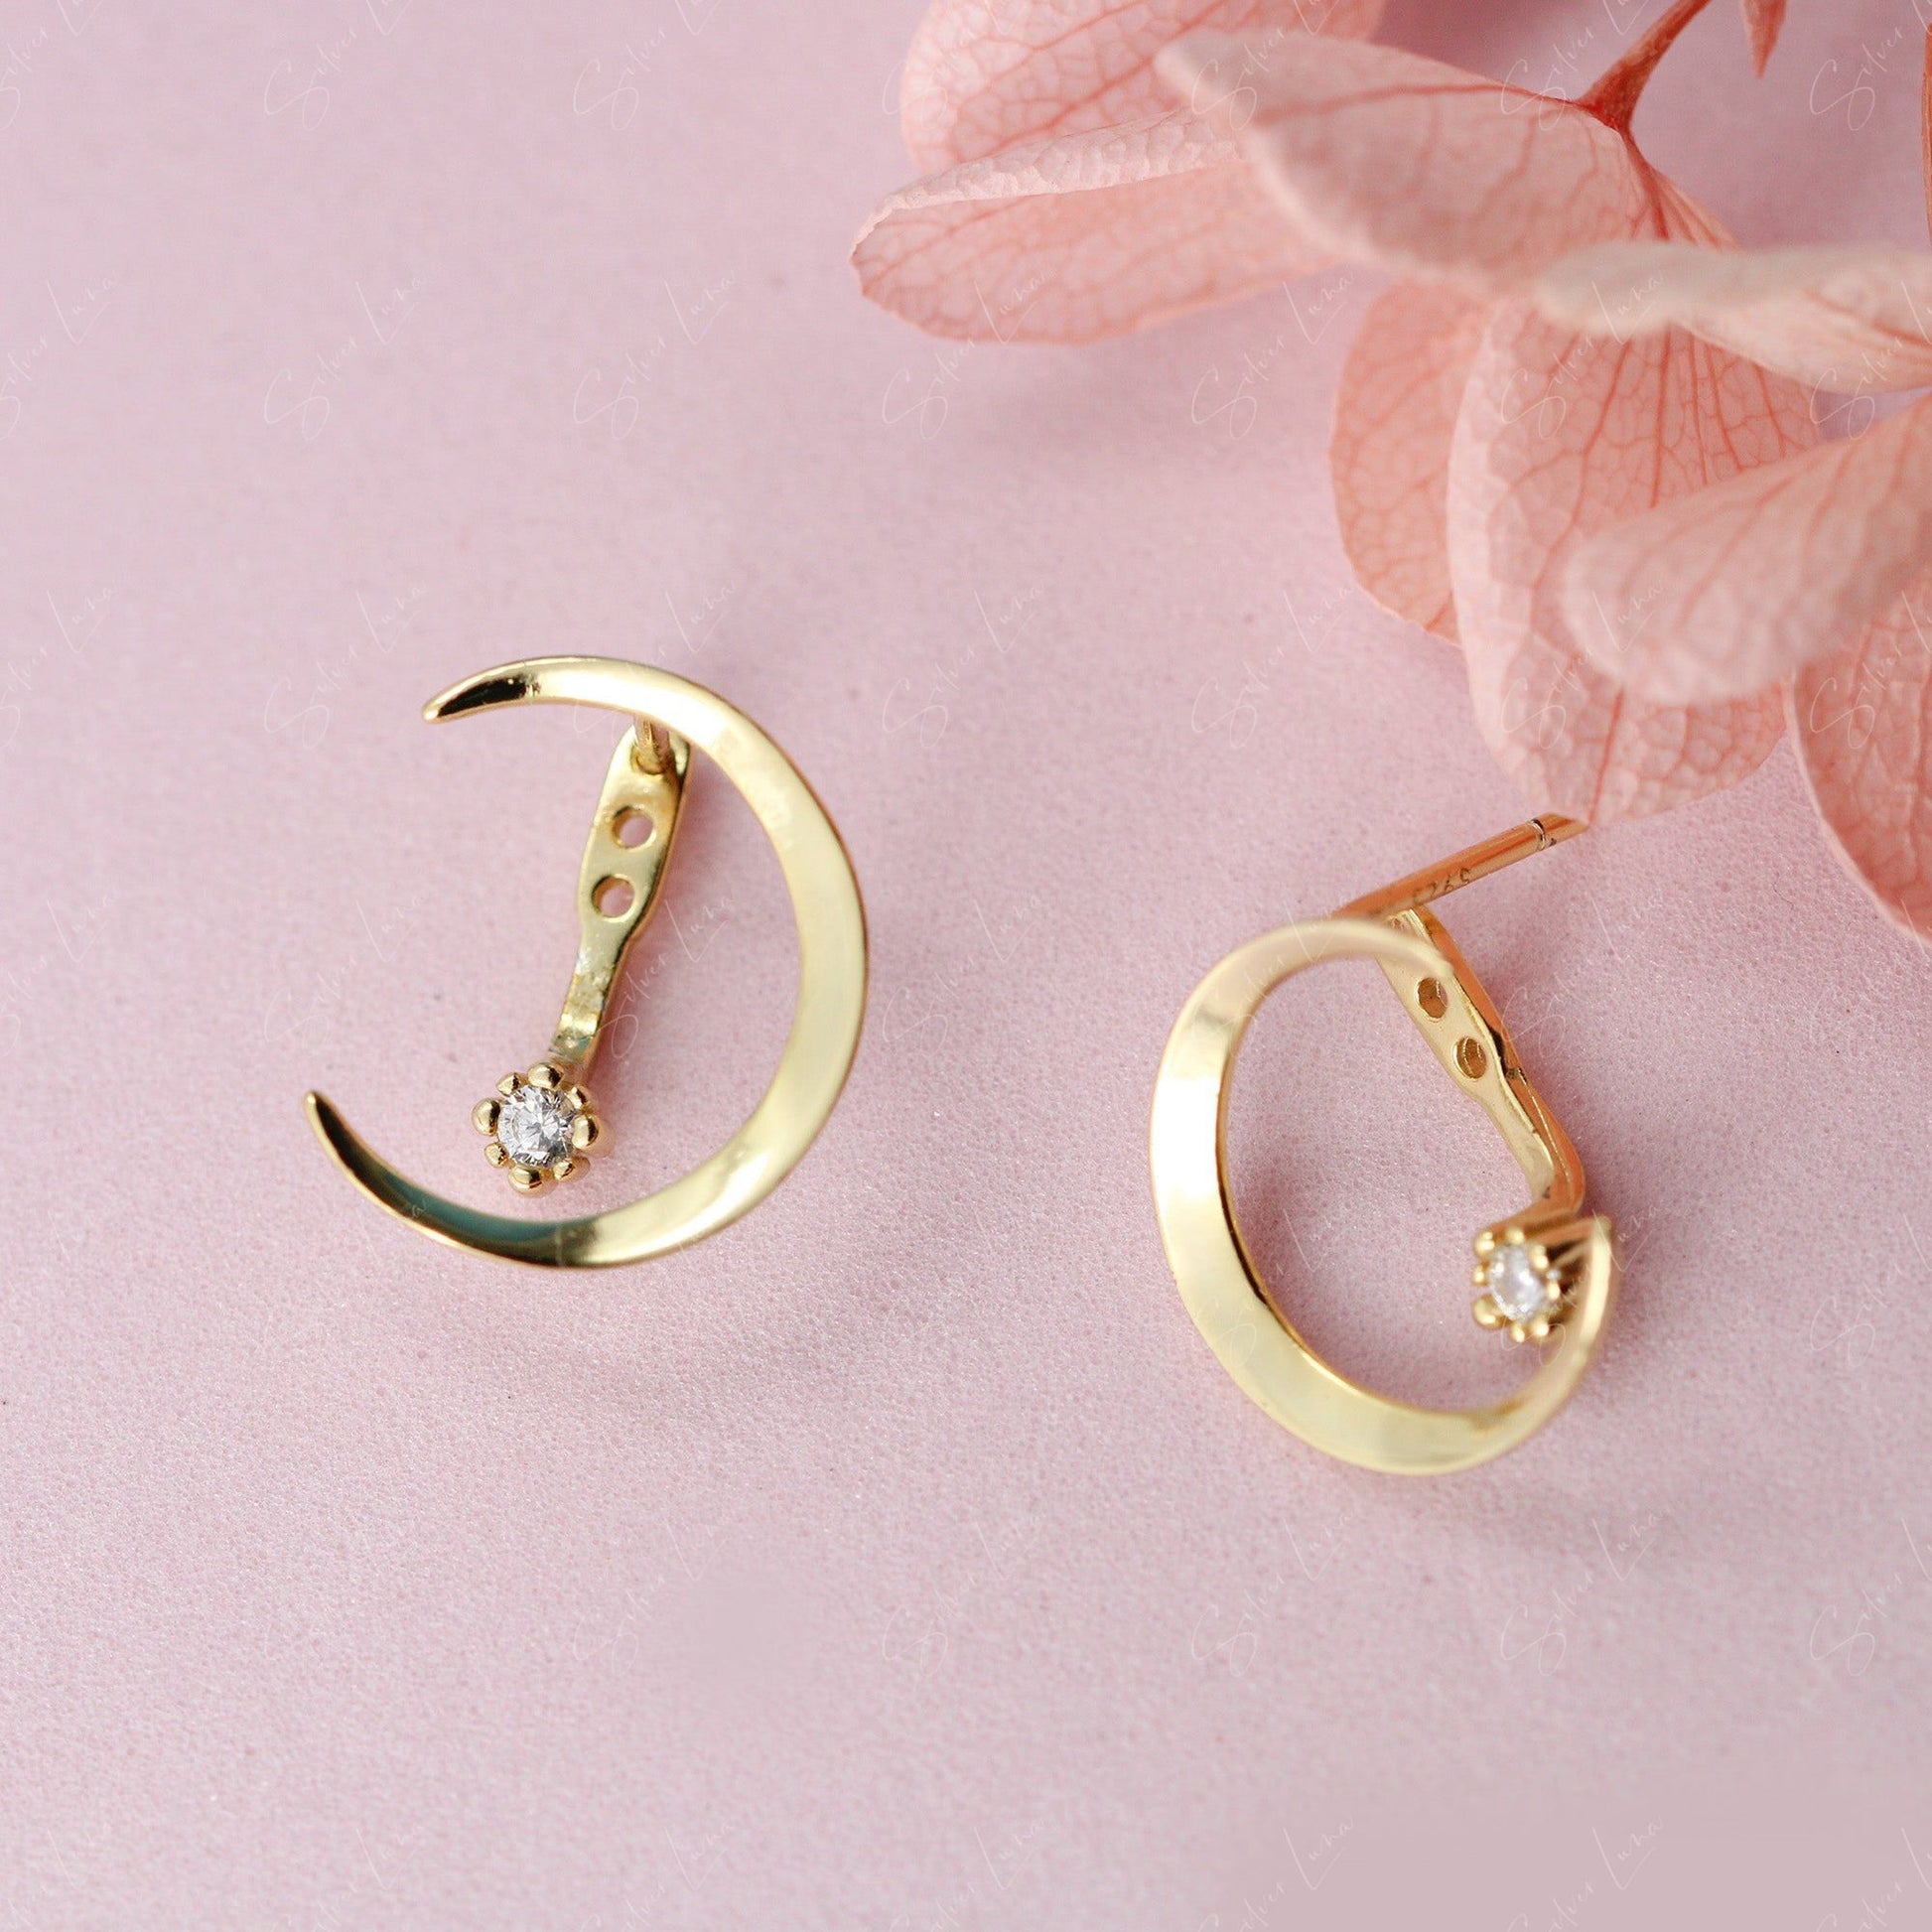 Moon And Star Stud Earrings With Ear Jacket Gold